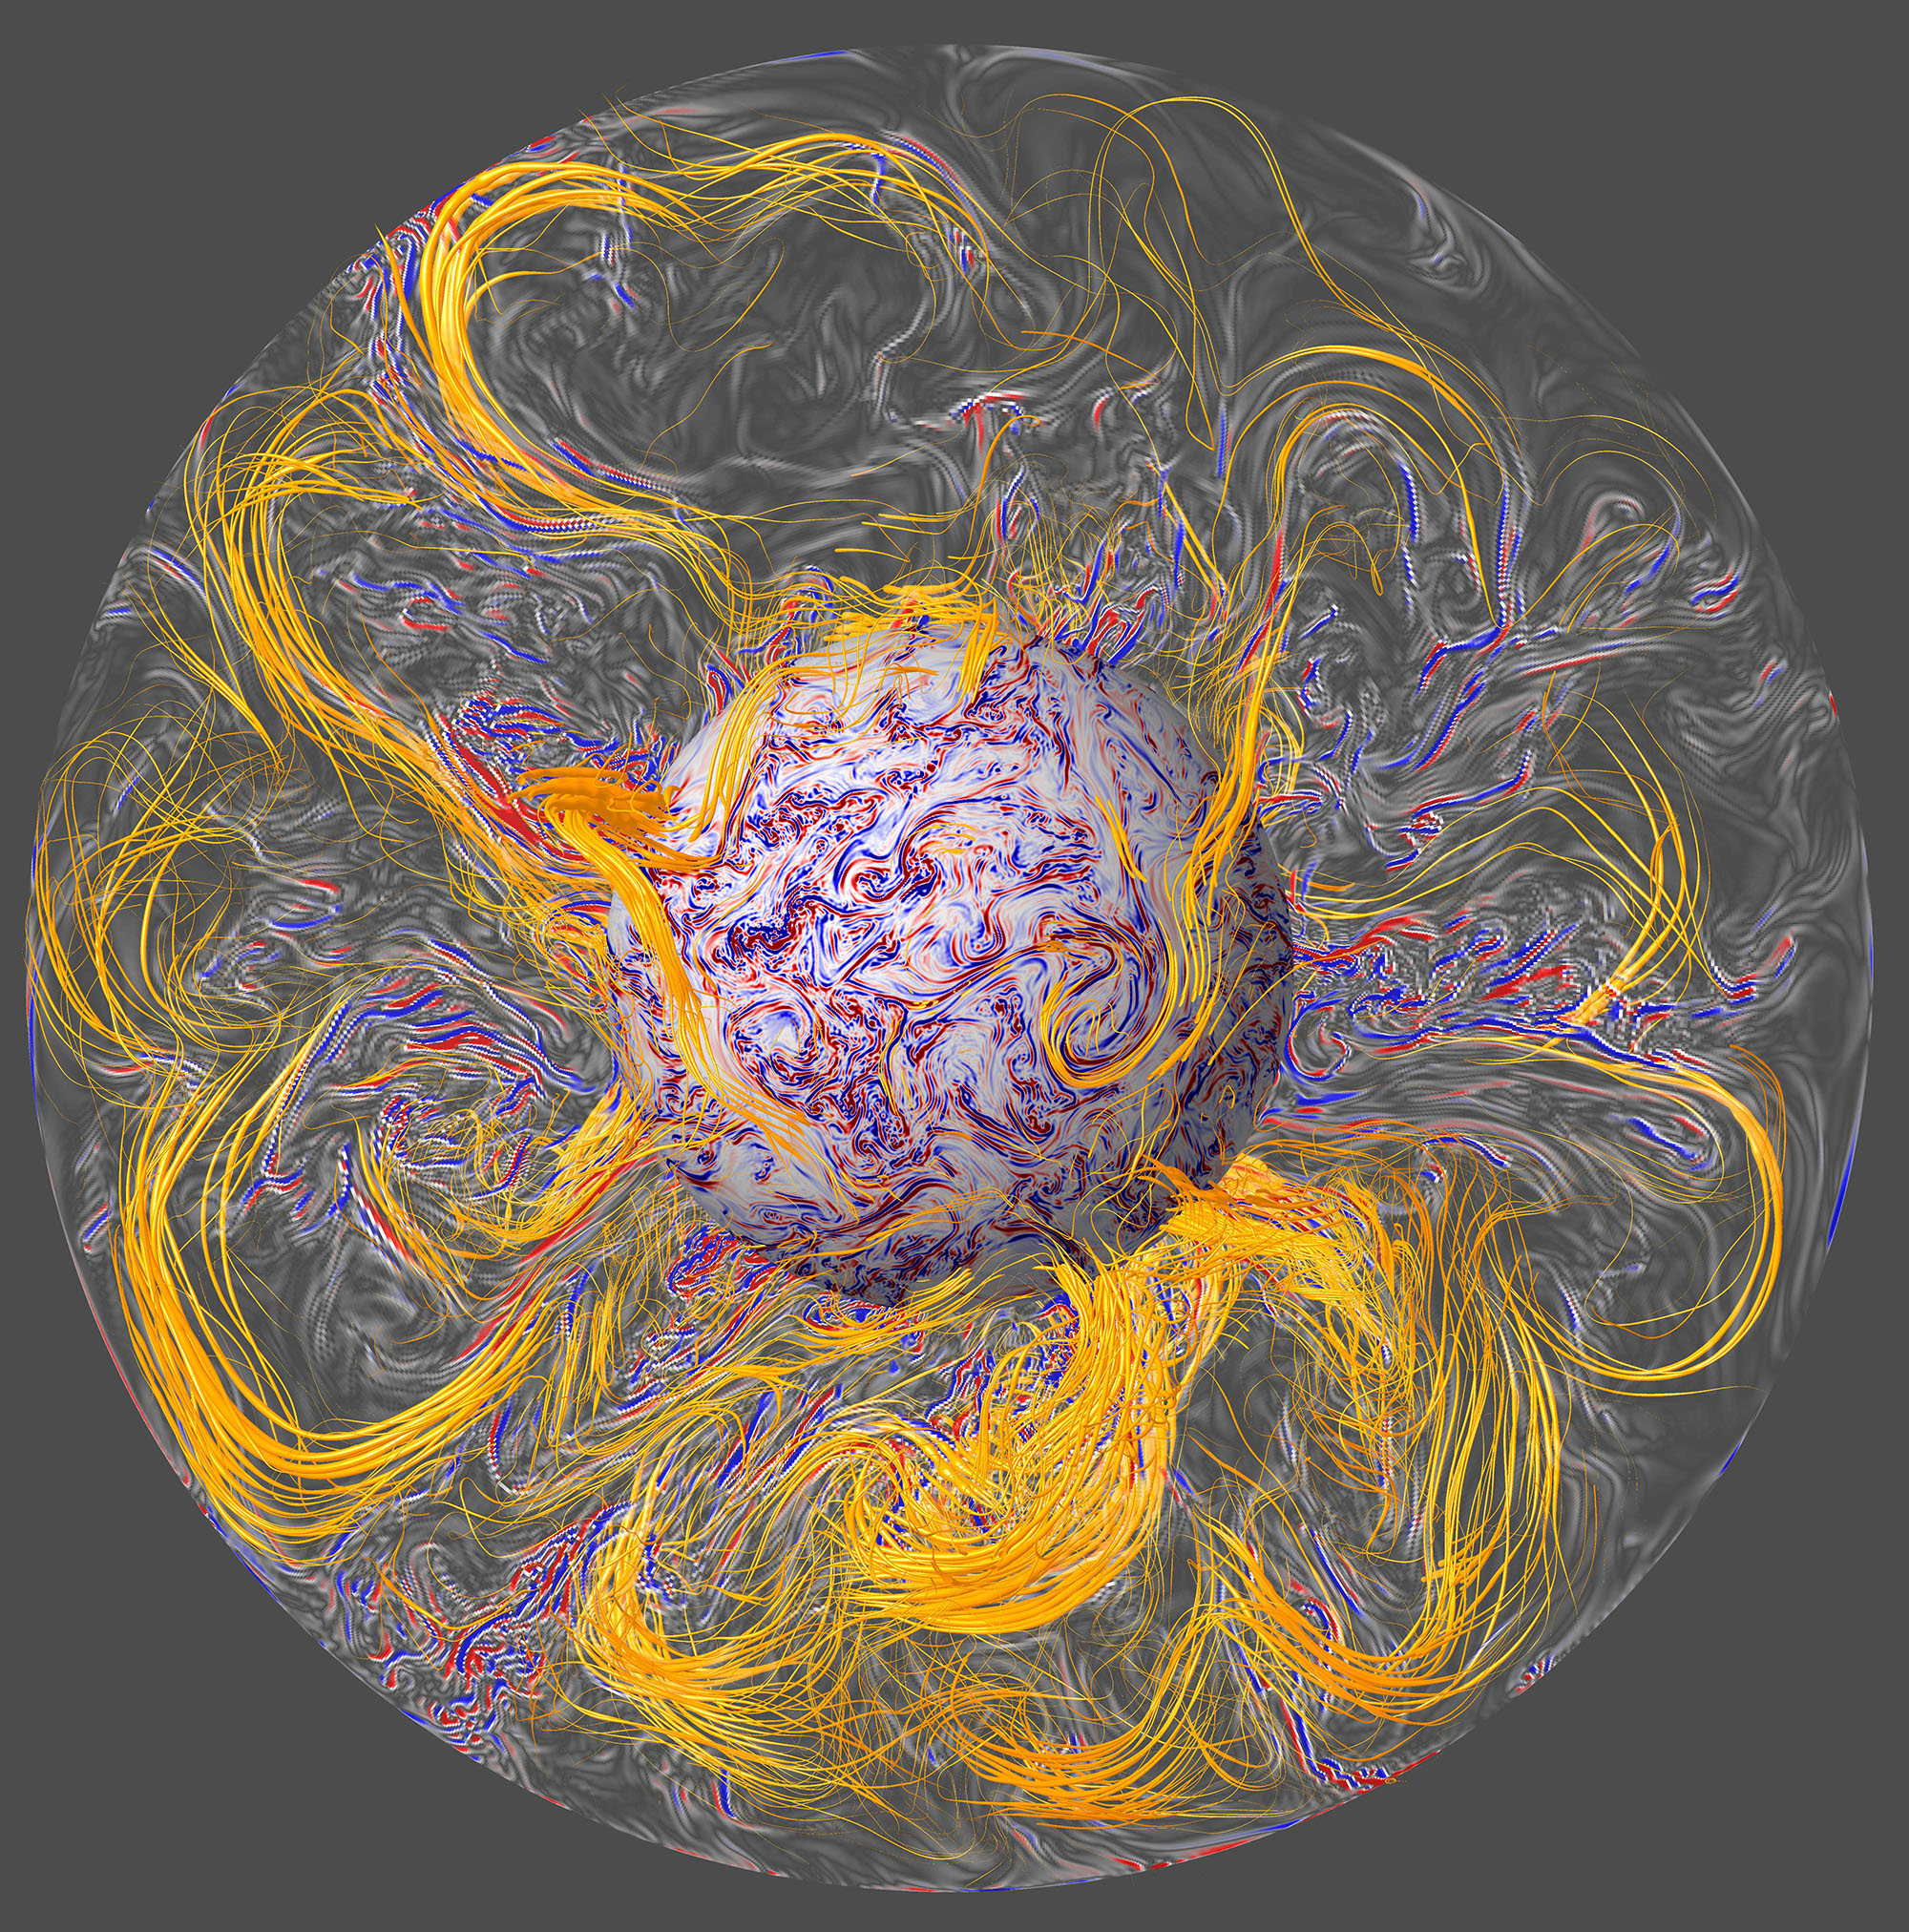 Simulation of the Magnetic Field in Earth's Core